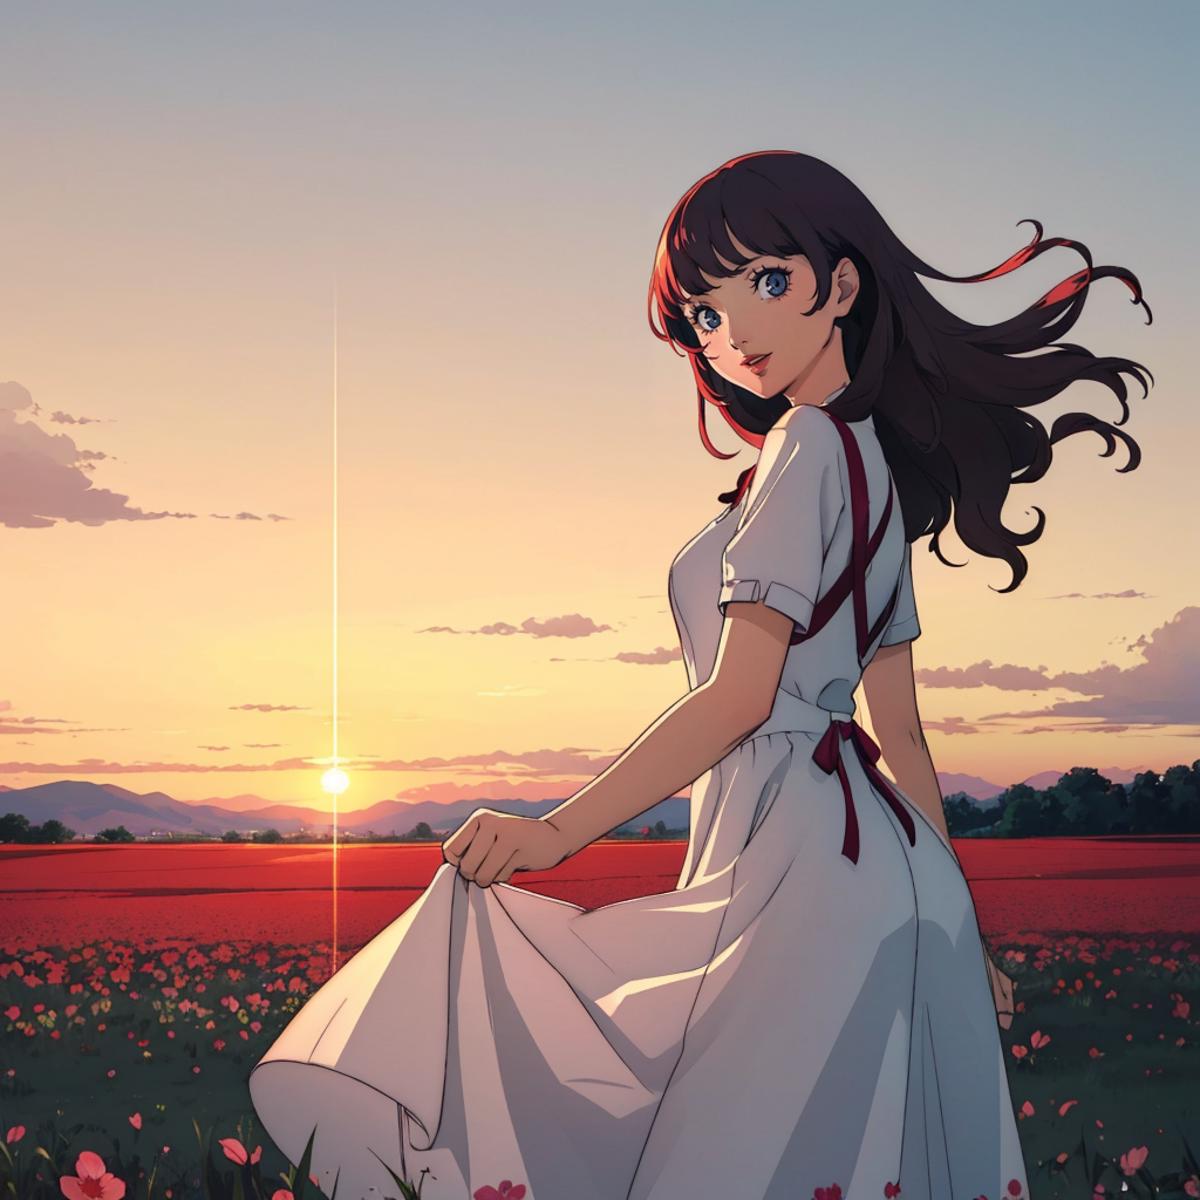 A beautiful anime girl with long black hair standing in a field during sunset.